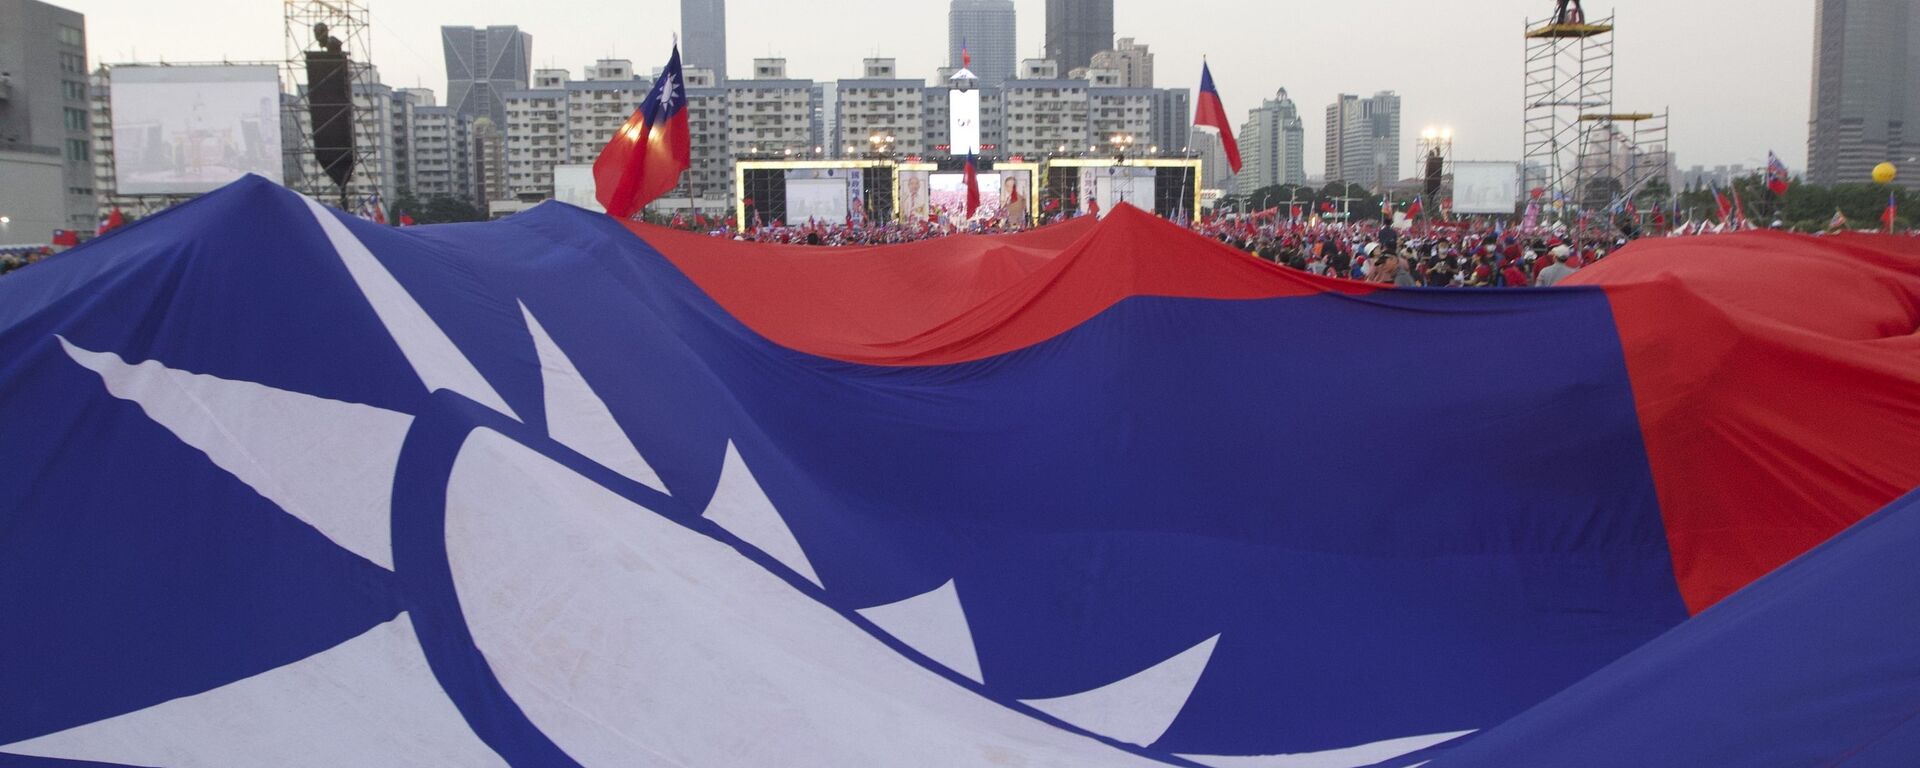 Supporters of Taiwan's 2020 presidential election candidate for the KMT, or Nationalist Party, Han Kuo-yu pass along a giant Taiwanese flag for the start of a campaign rally in southern Taiwan's Kaohsiung city on Friday, Jan 10, 2020 - Sputnik International, 1920, 13.01.2024